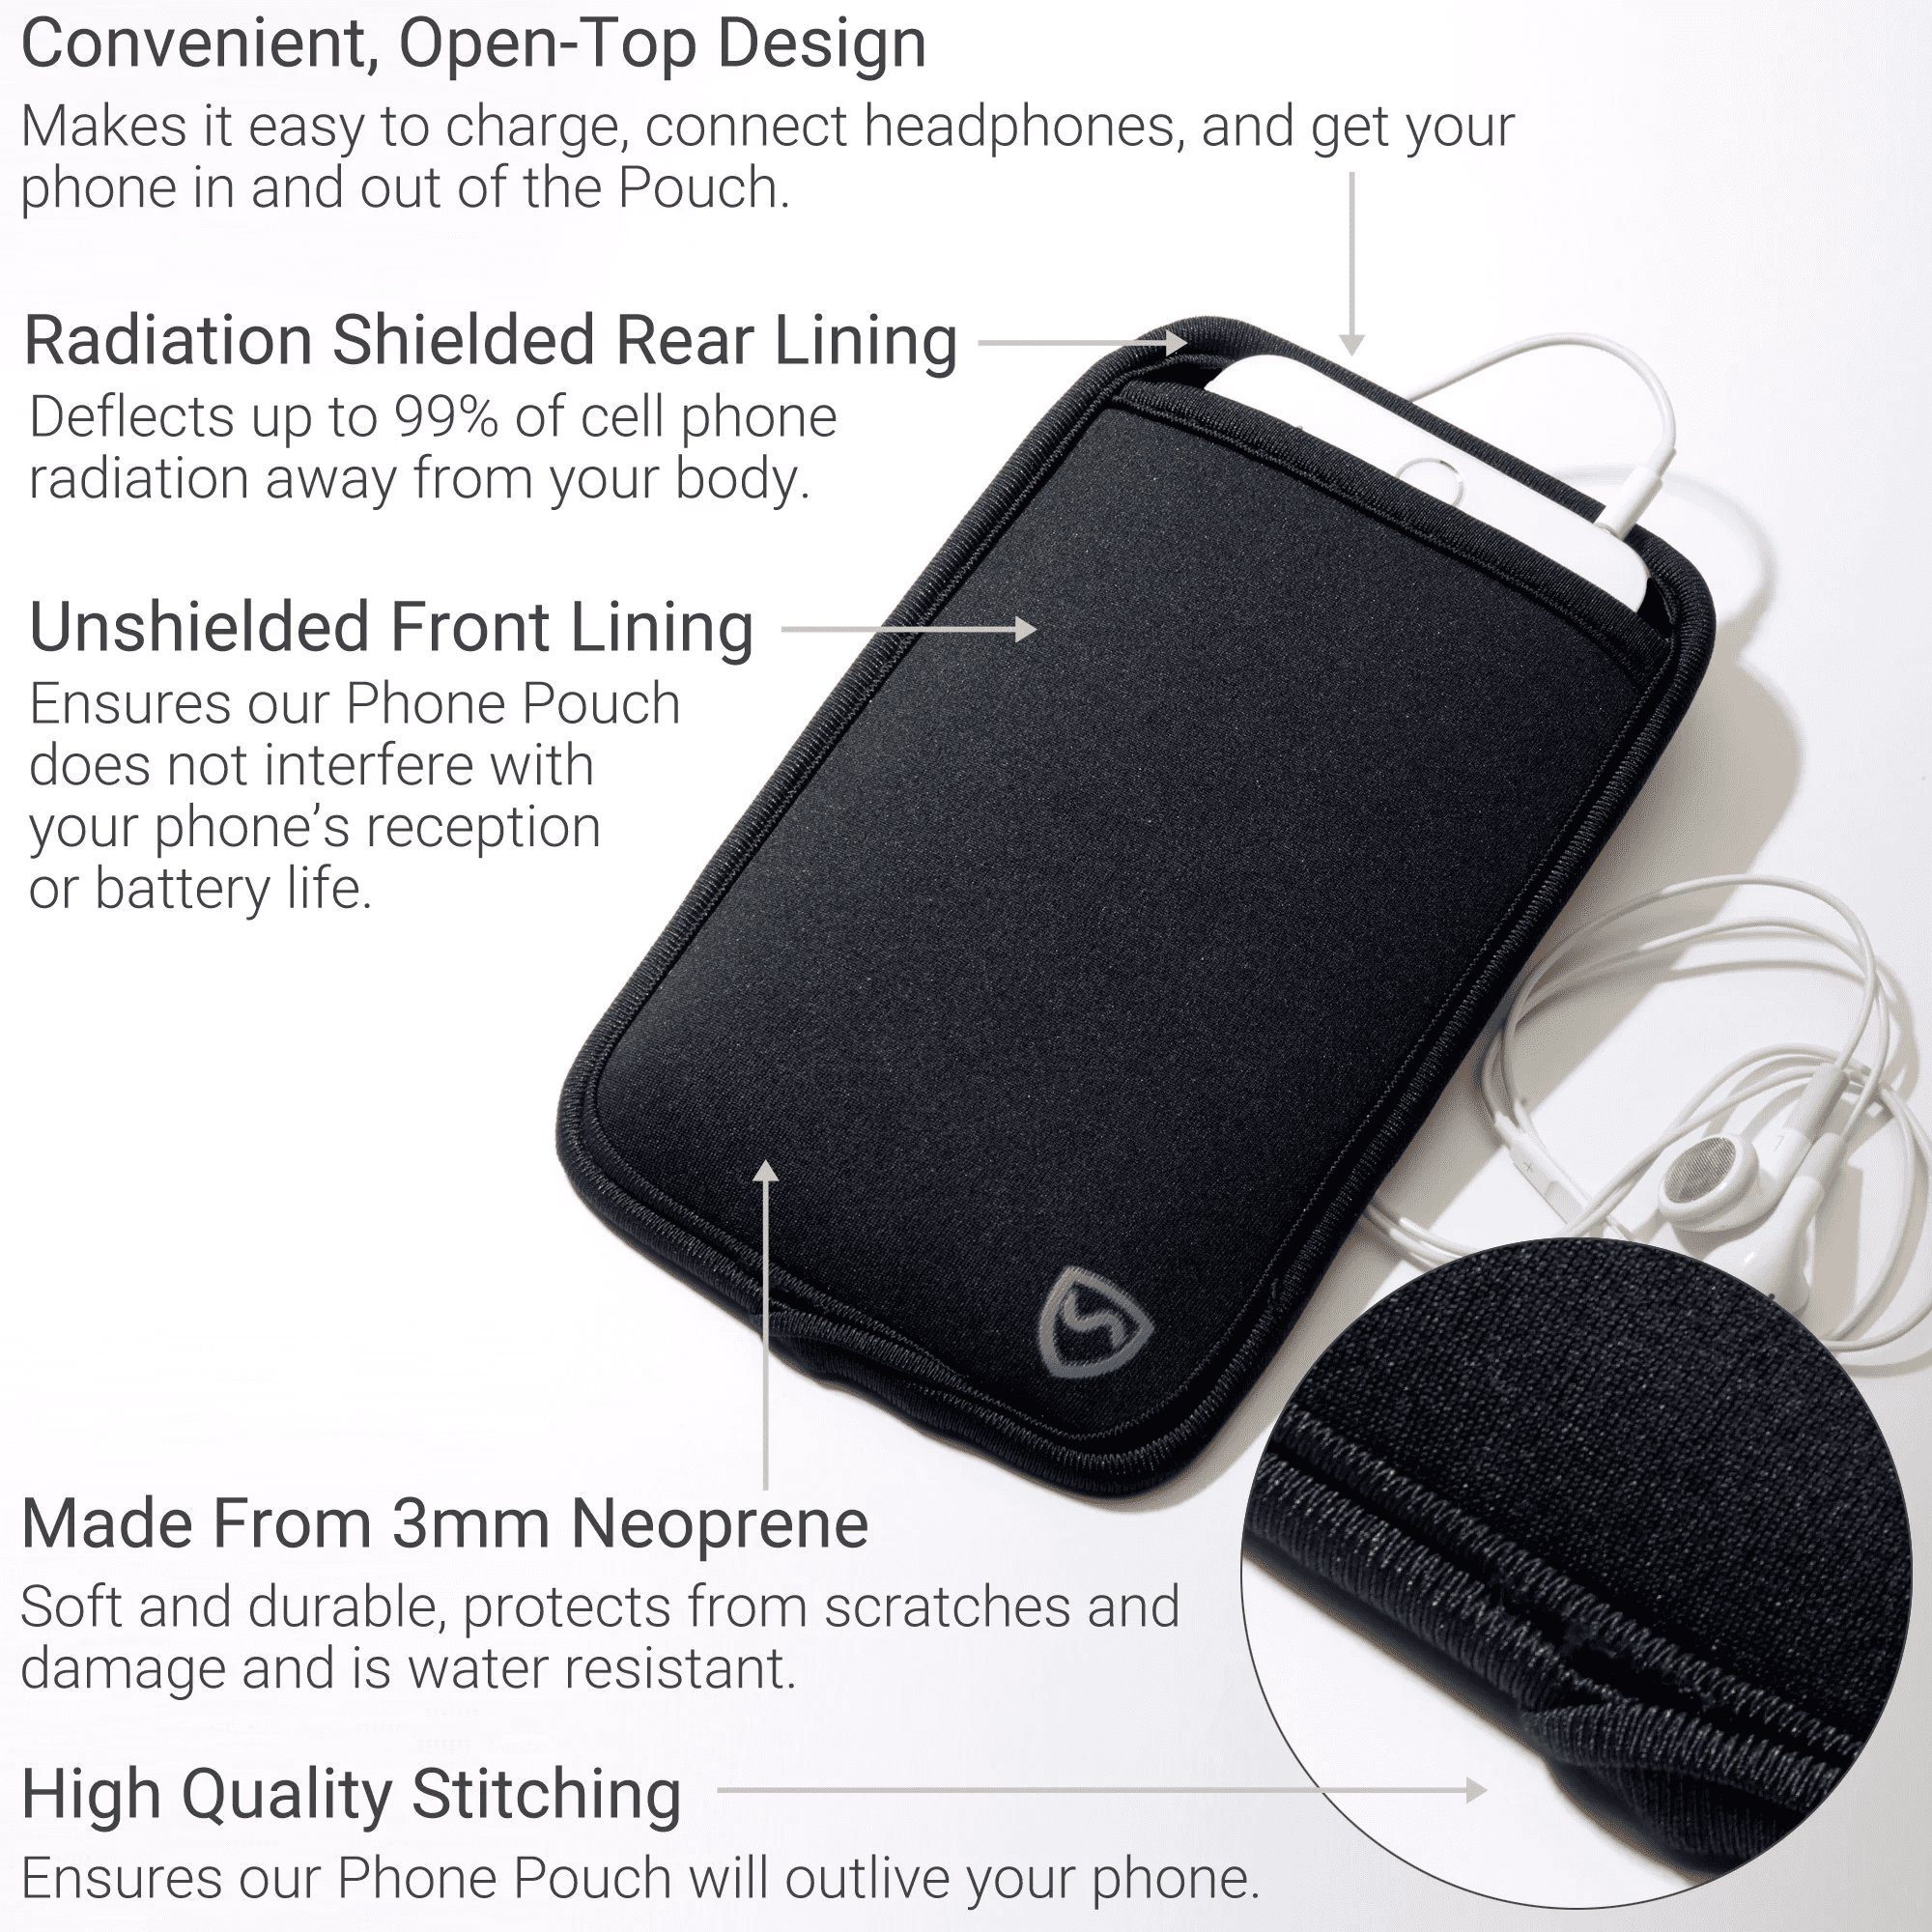 Is It Safe To Carry Your Phone in Your Pocket? - Shield Your Body